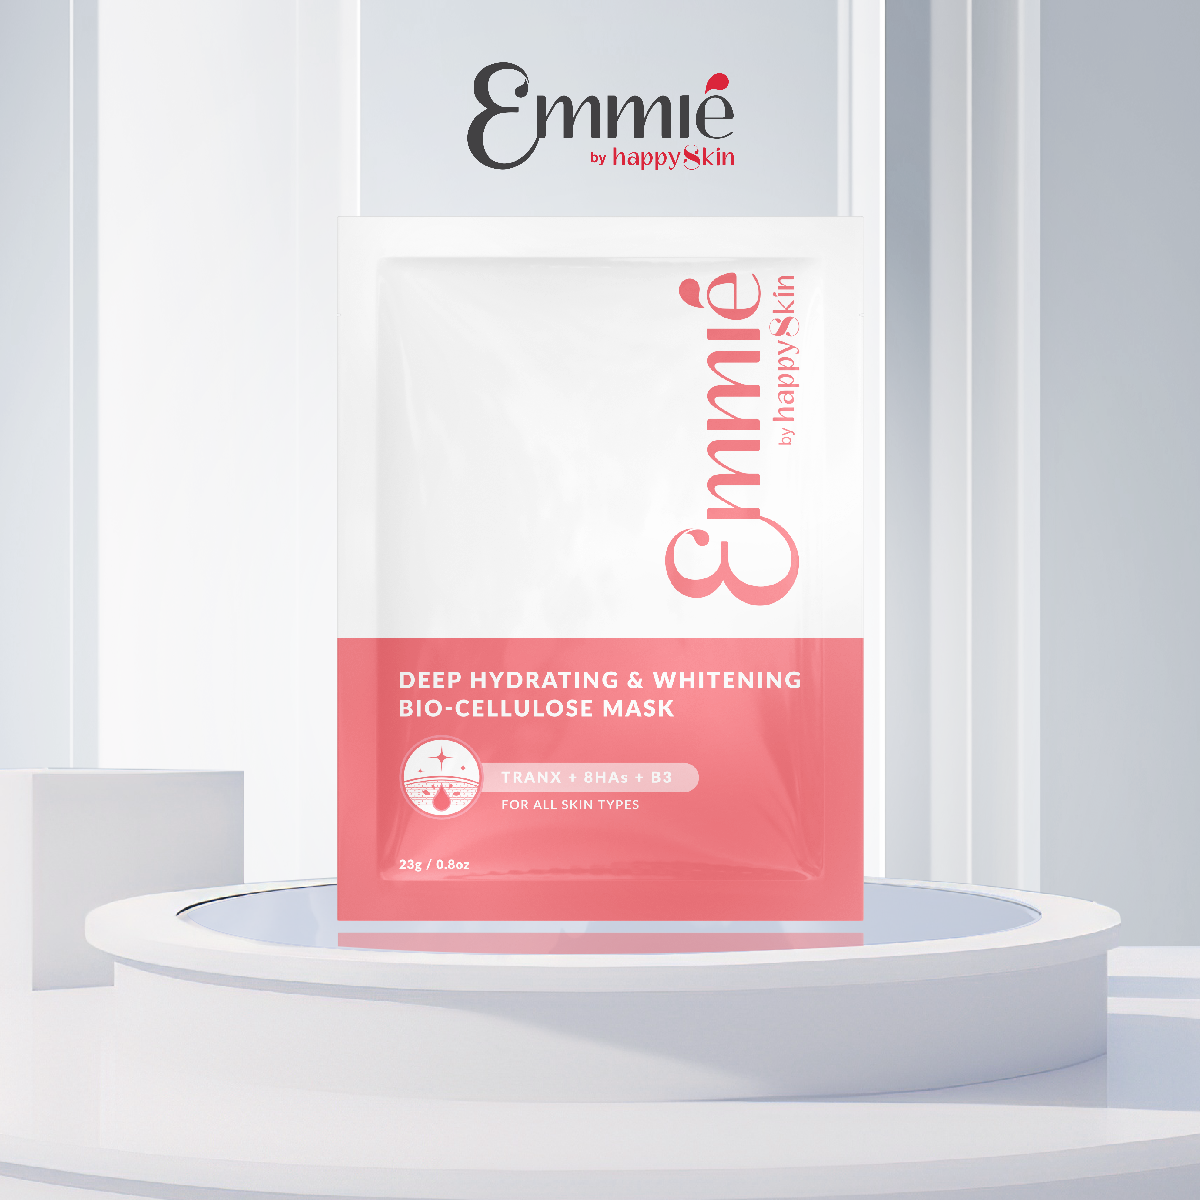 Mặt Nạ Dưỡng Trắng Super Hydrating & Whitening Bio Cellulose Mask Emmié by HappySkin